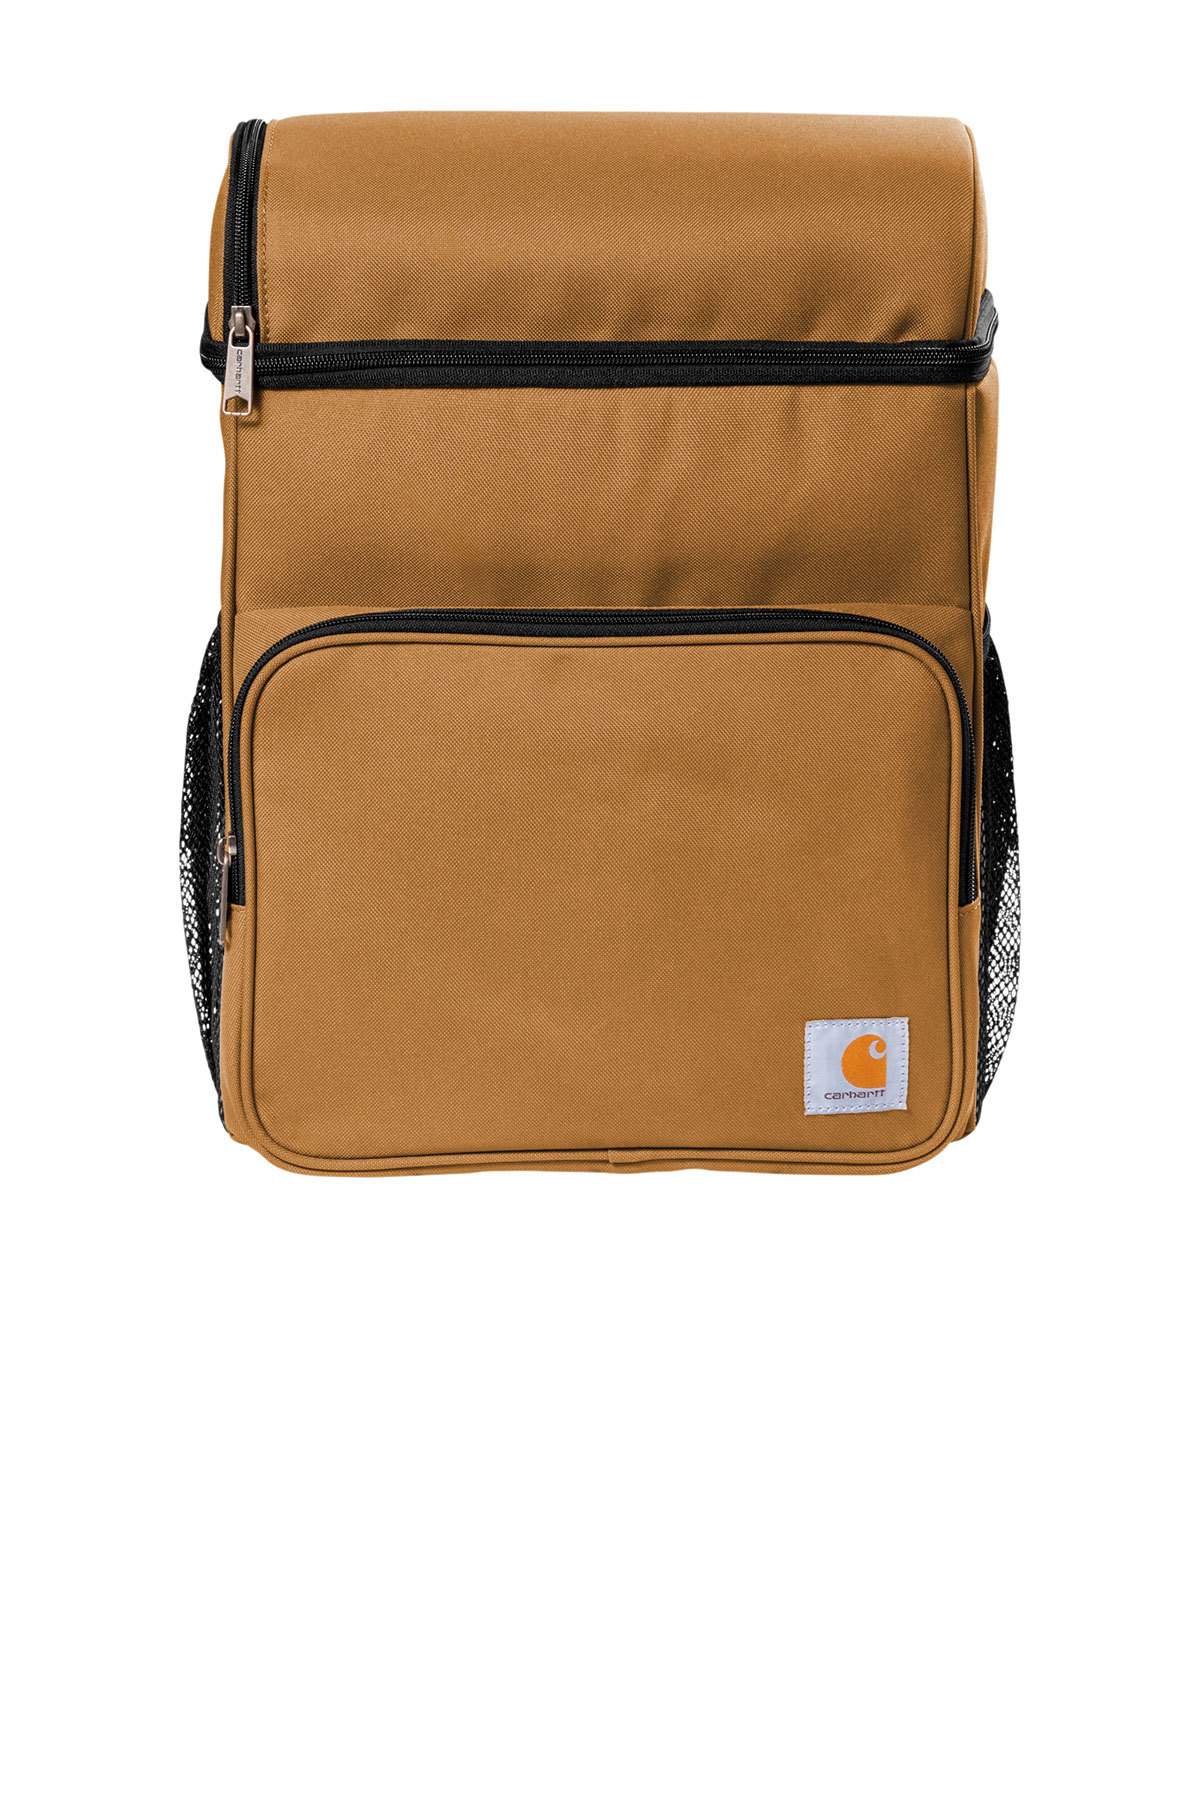 Carhartt Backpack 20-Can Cooler, Product